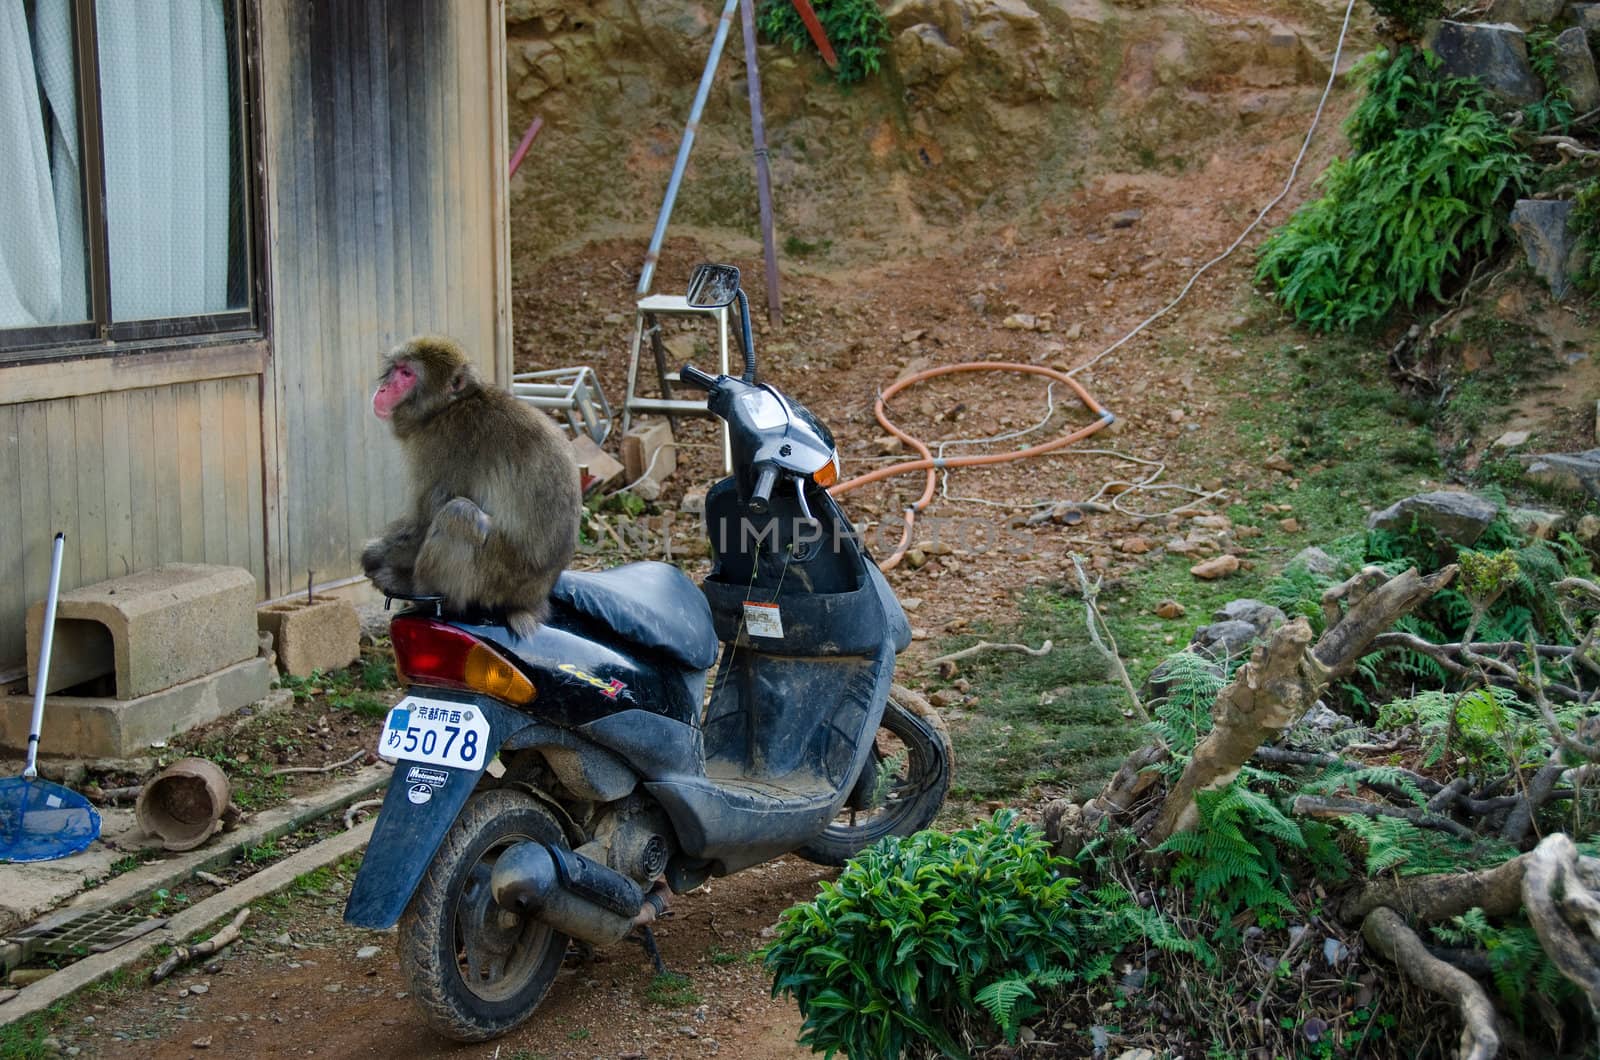 Japanese macaque sitting on a motor scooter by Arrxxx